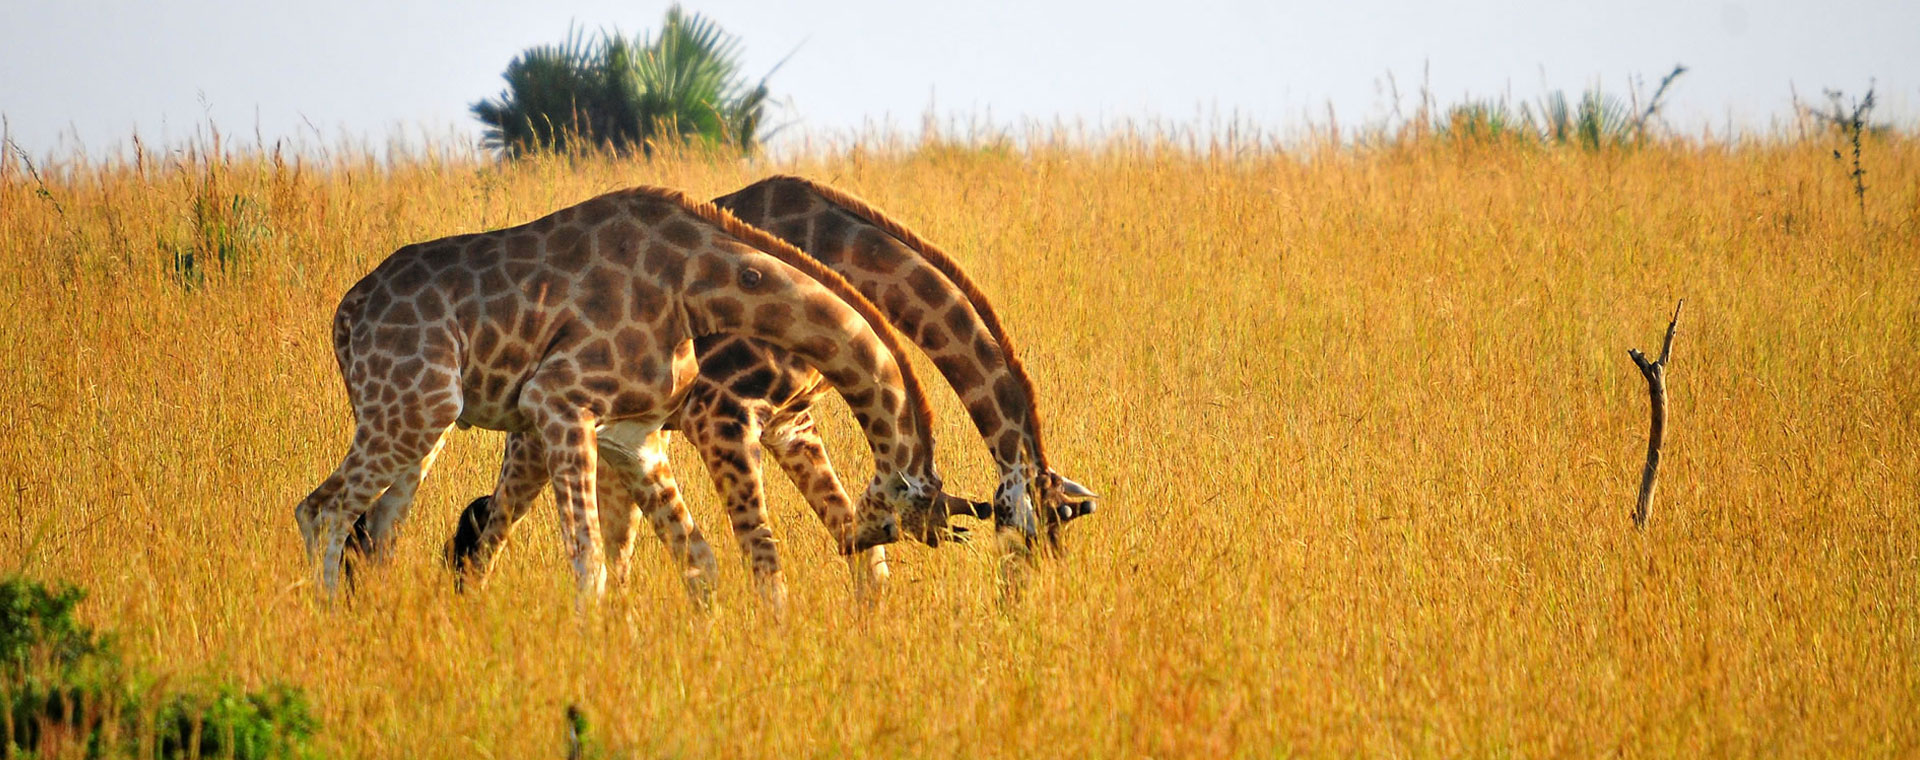 Kidepo Valley National Park 